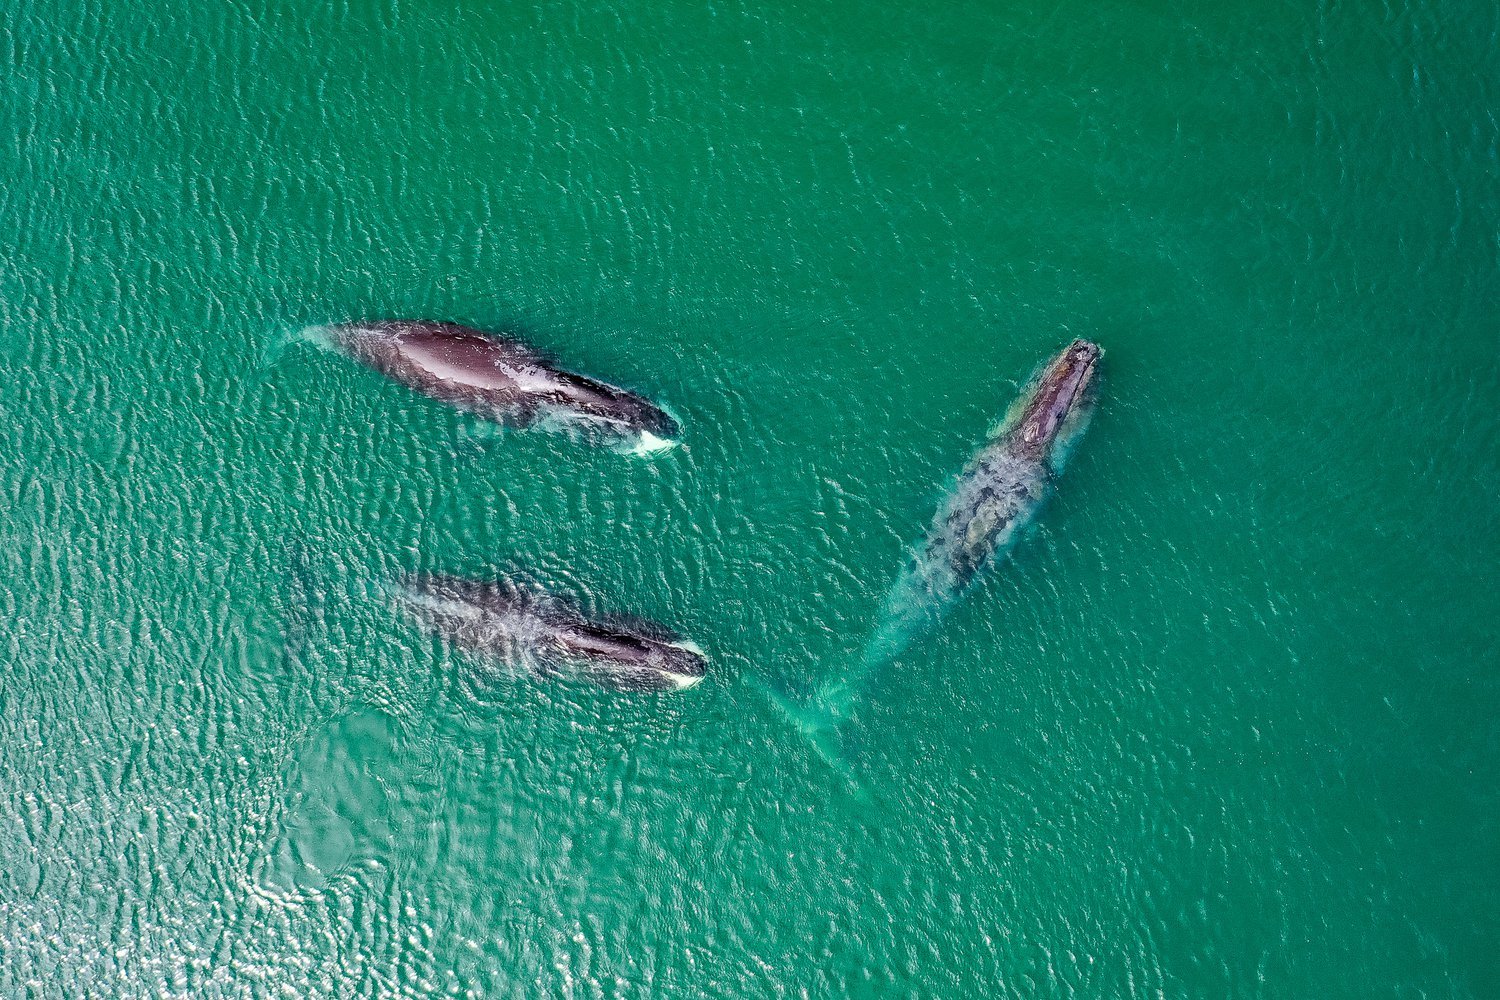 WWF expedition to bowhead whales in Wrangel Bay - Whale, Bowhead whales, Wild animals, Animal Rescue, Animal protection, Expedition, Bay, WWF, , The national geographic, Interesting, Sea of ??Okhotsk, Protection of Nature, Research, Nature, Longpost